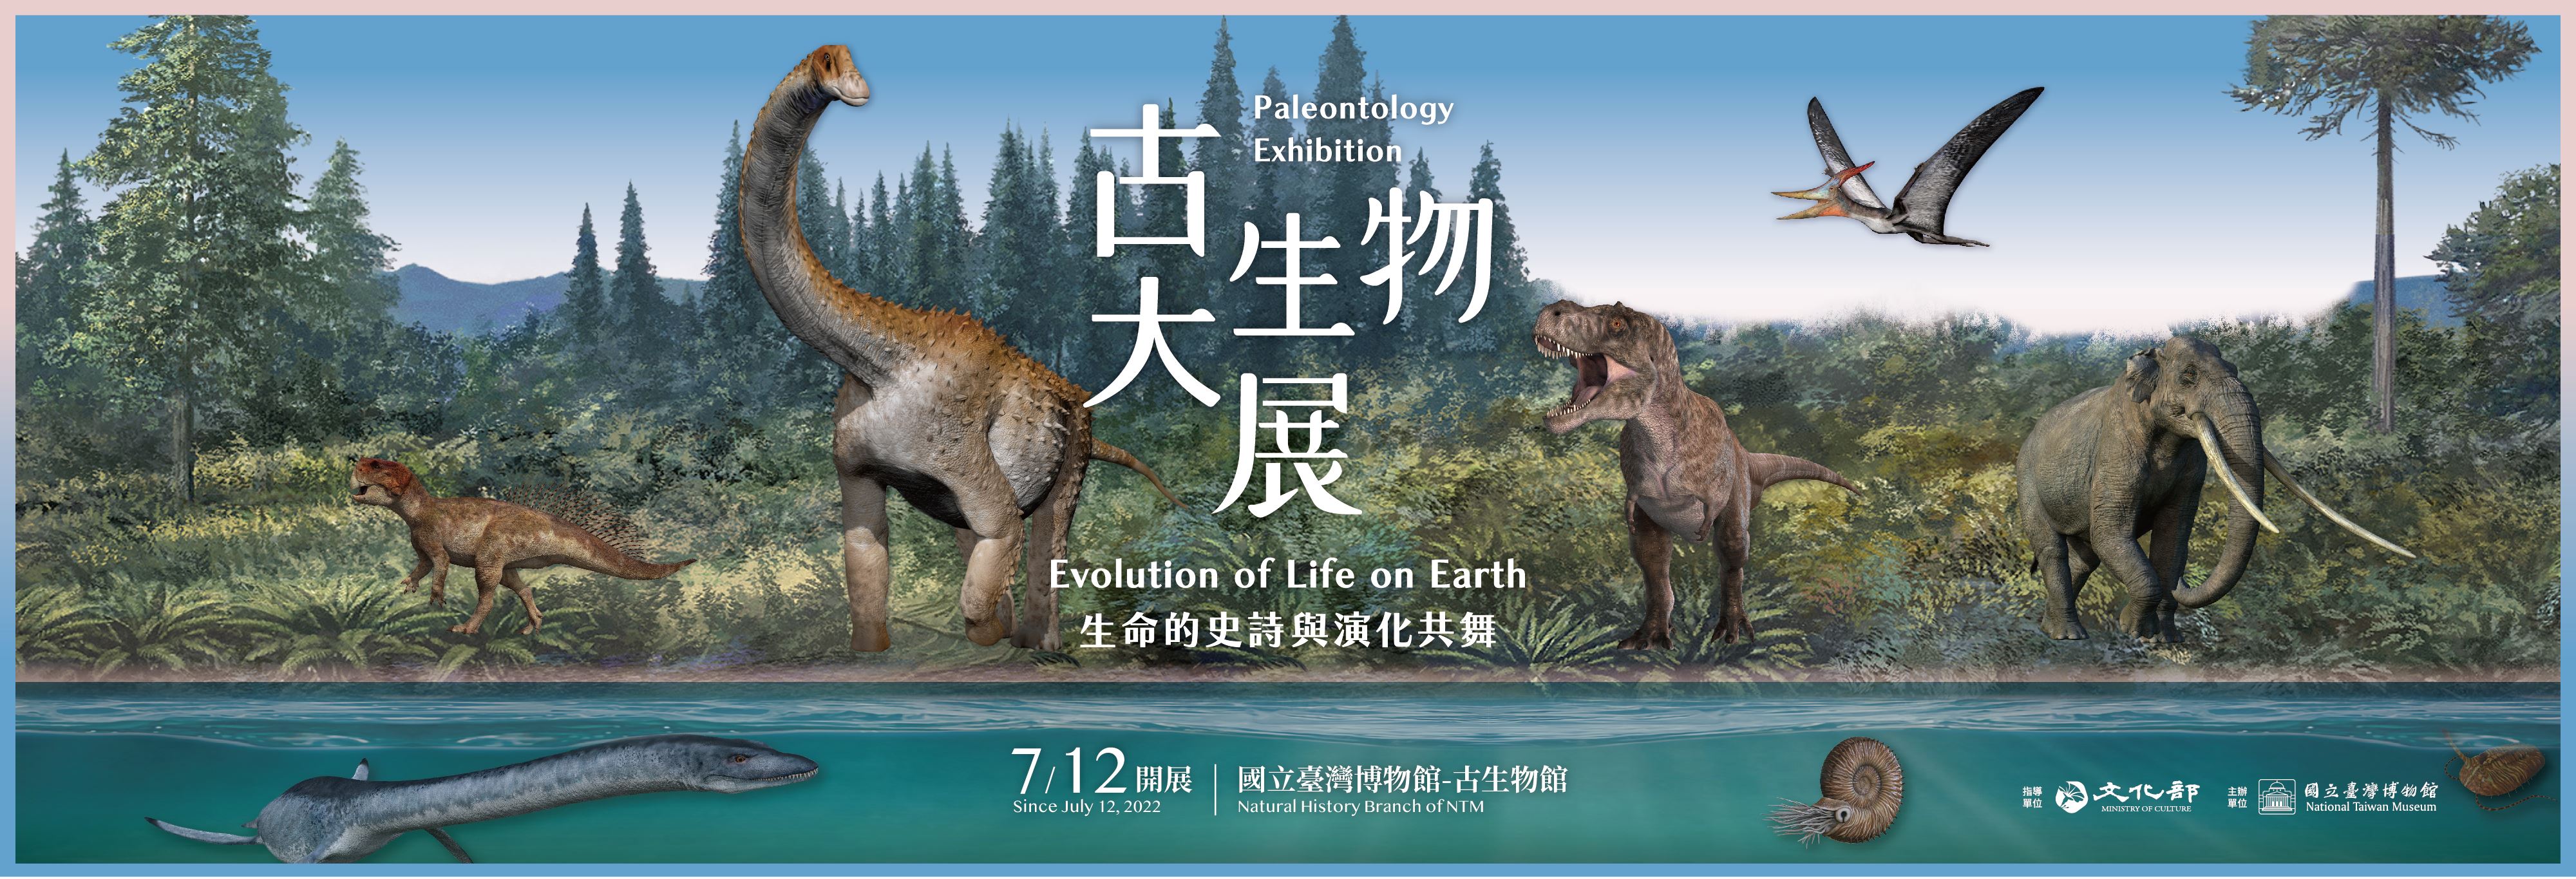 Paleontology Exhibition - Evolution of Life on Earth